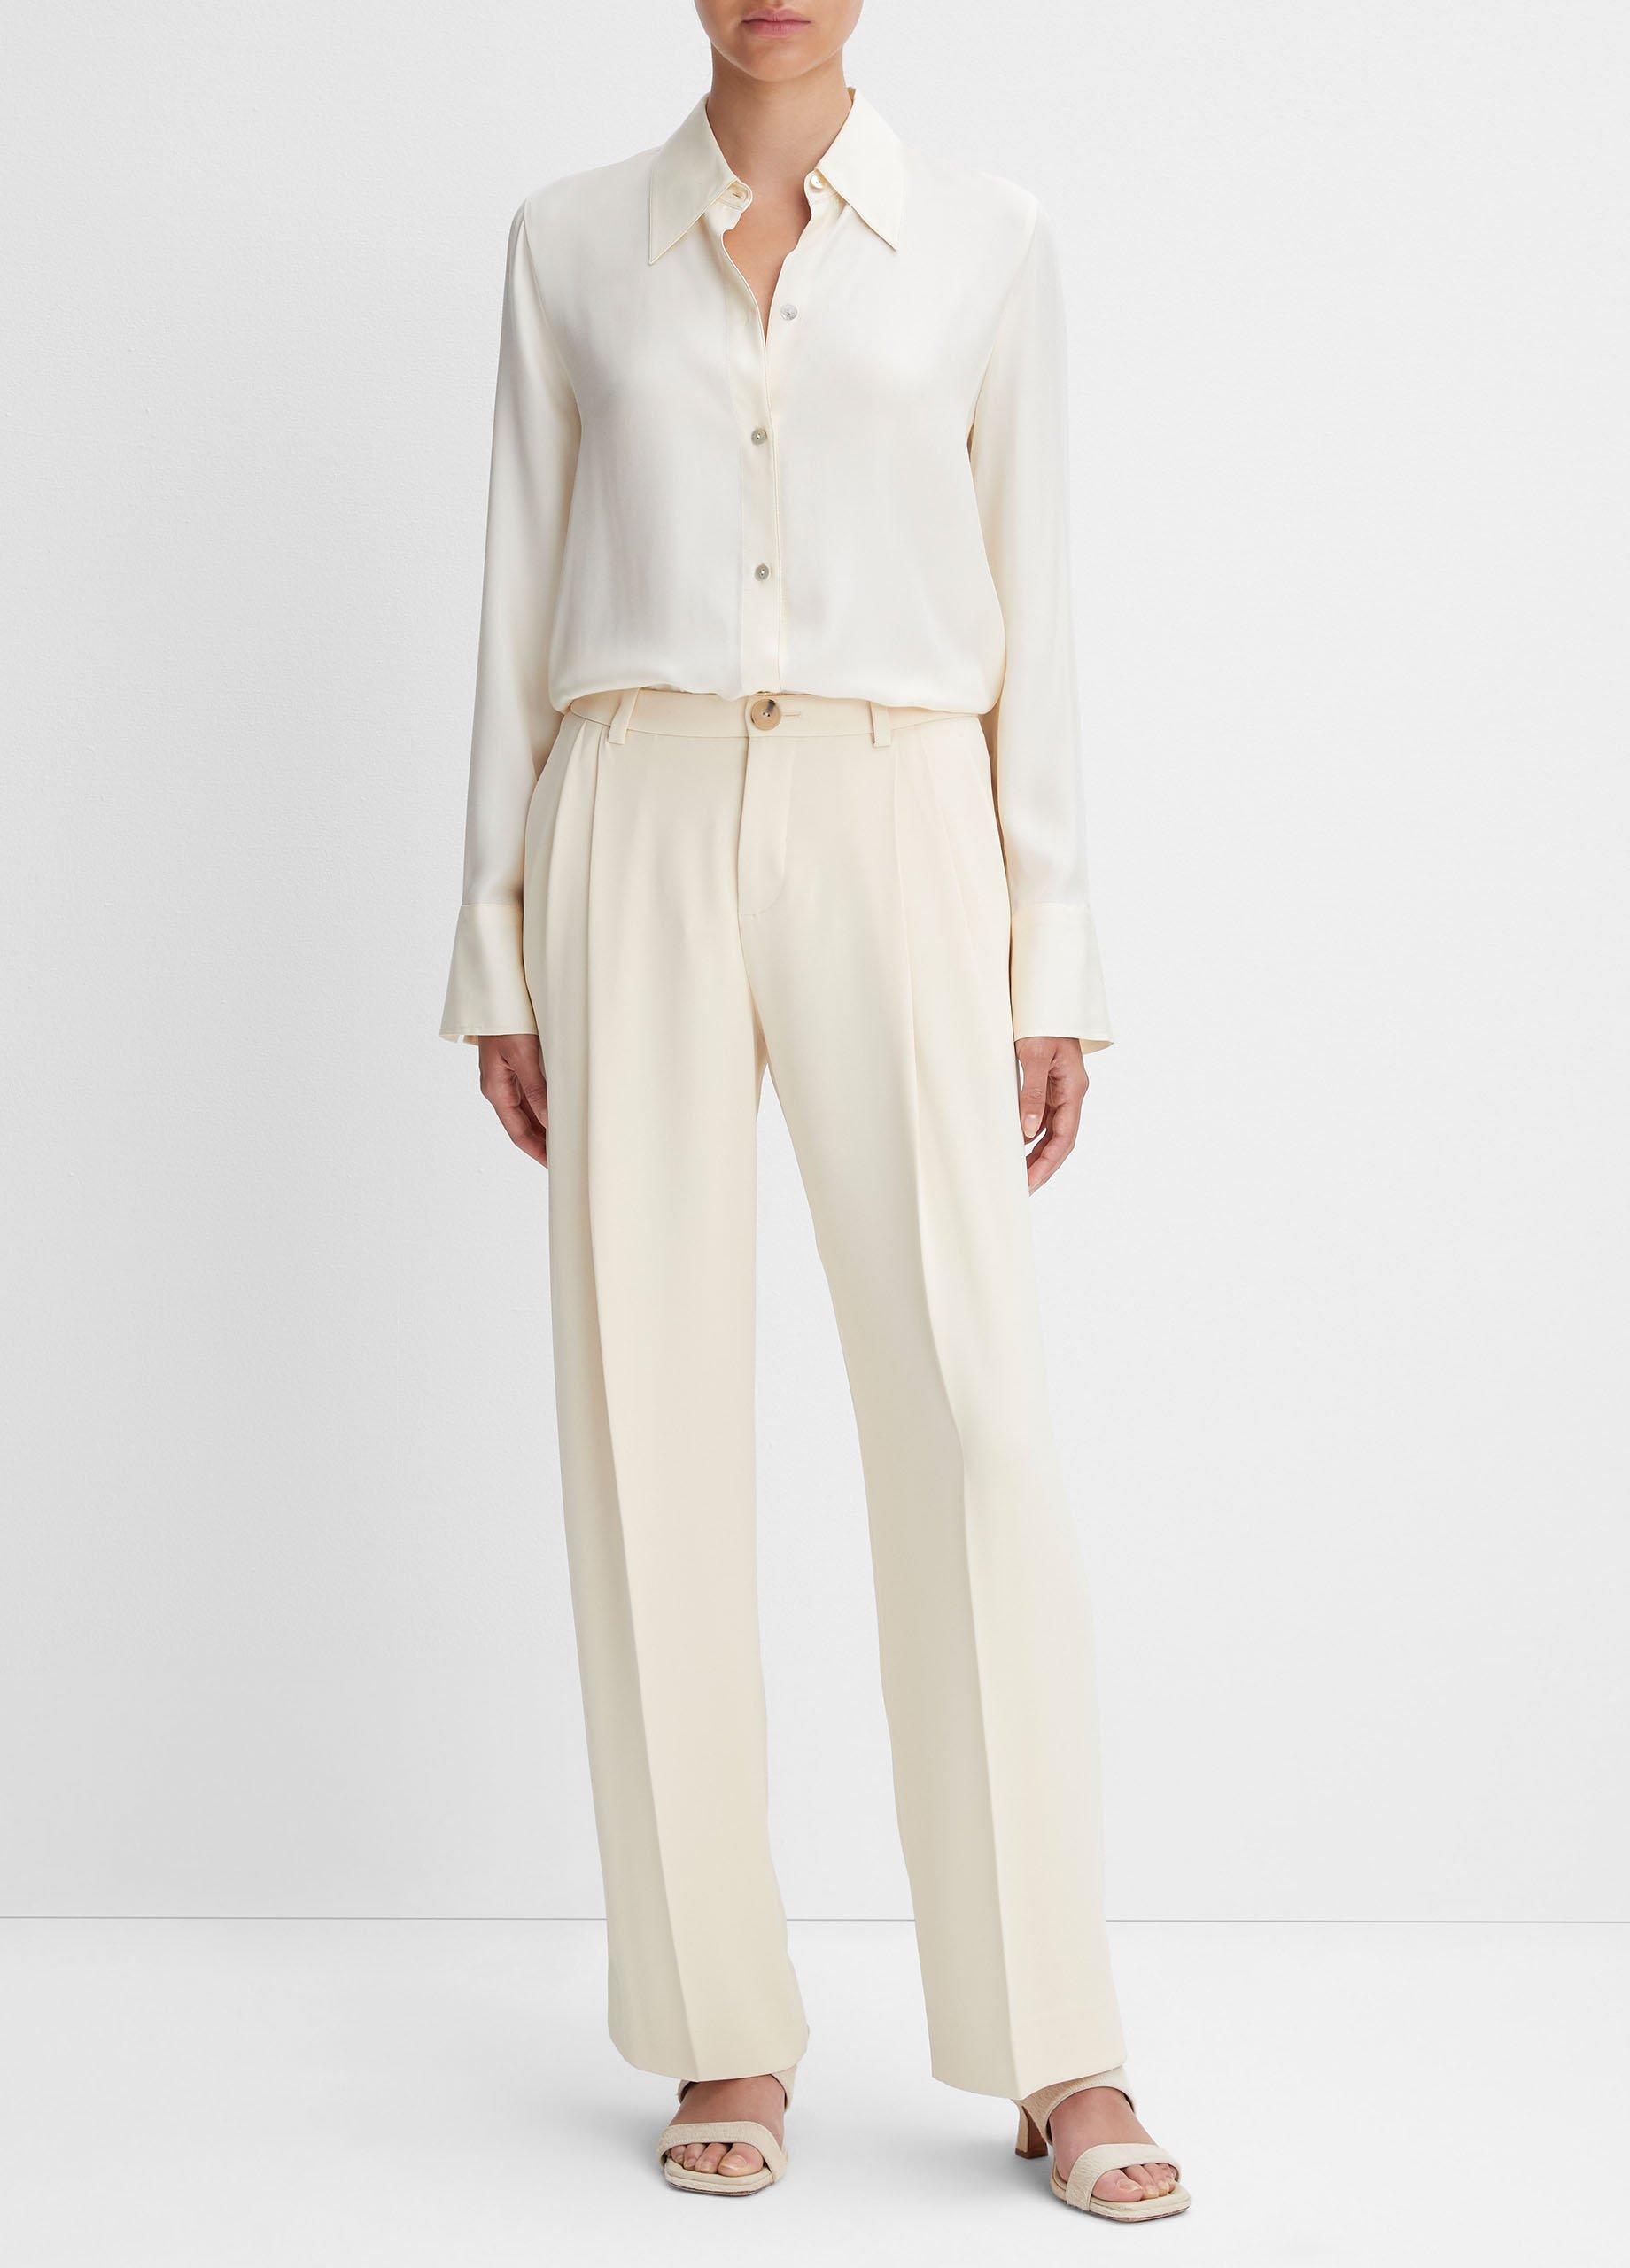 Drop-Waist Pleated Crepe Trouser in Pants & Shorts | Vince